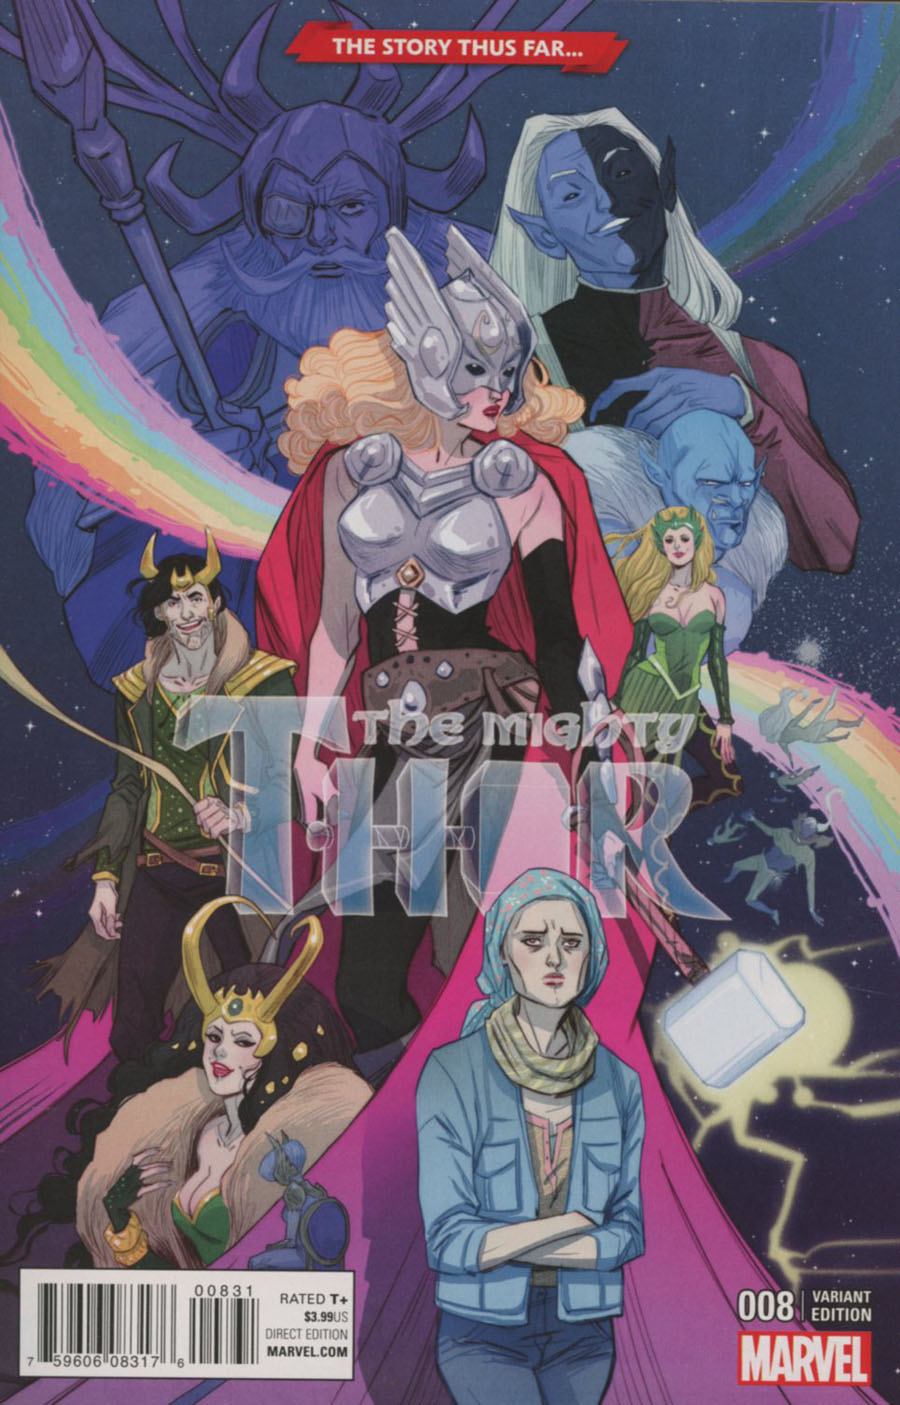 Mighty Thor Vol 2 #8 Cover B Variant Marguerite Sauvage Story Thus Far Cover